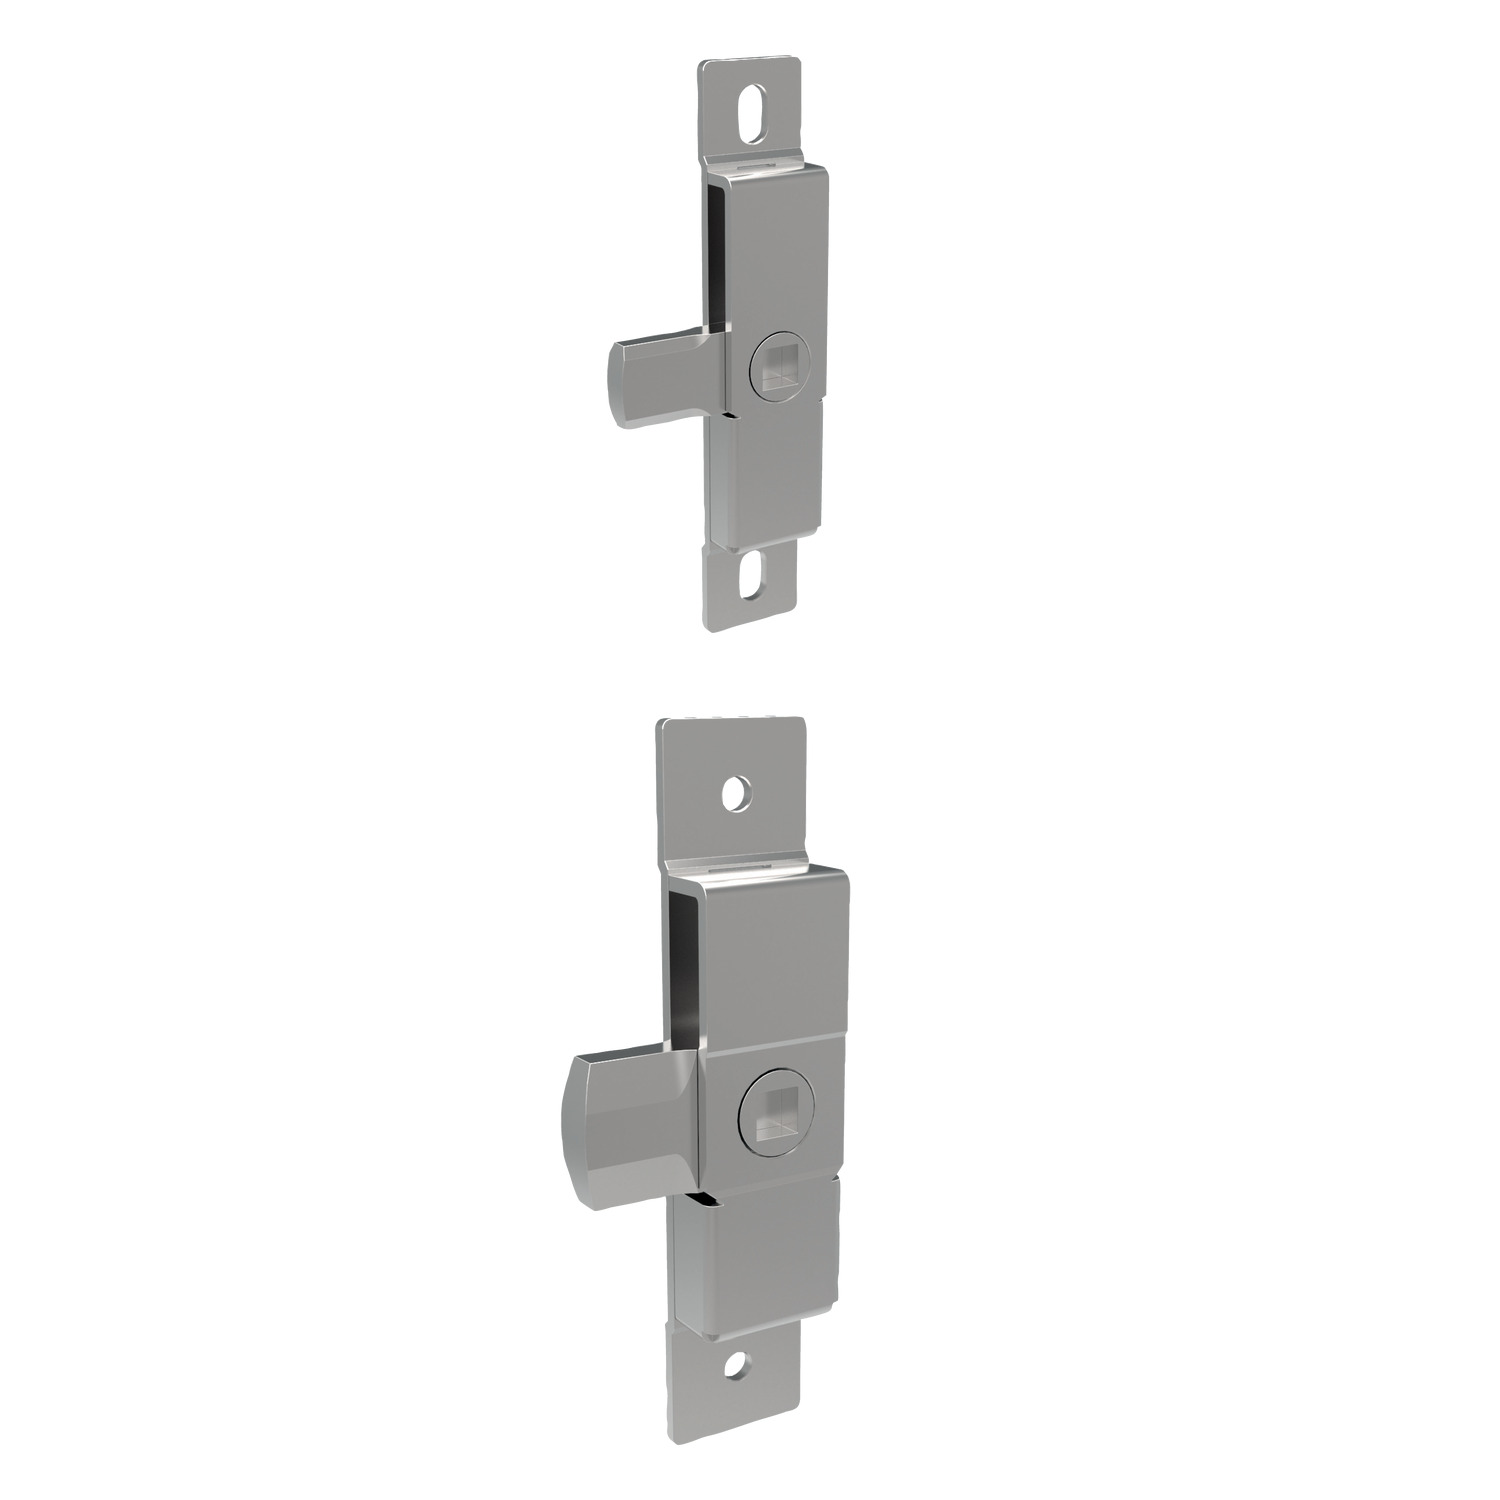 A1546 Panel Latches